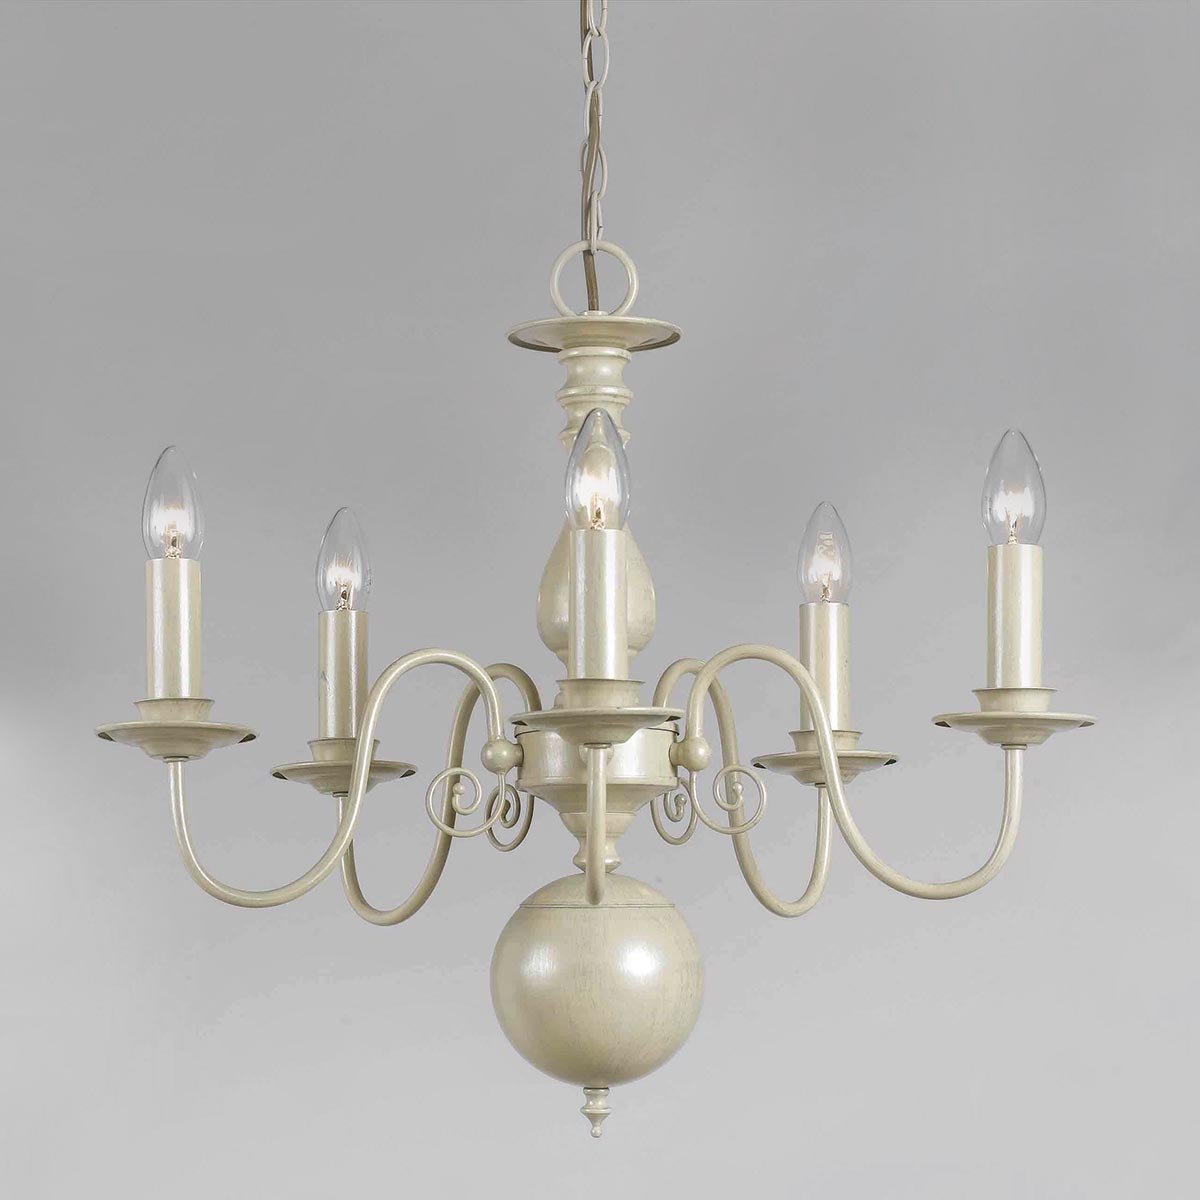 Impex Bologna Flemish Style 5 Light Chandelier Painted Cream Finish